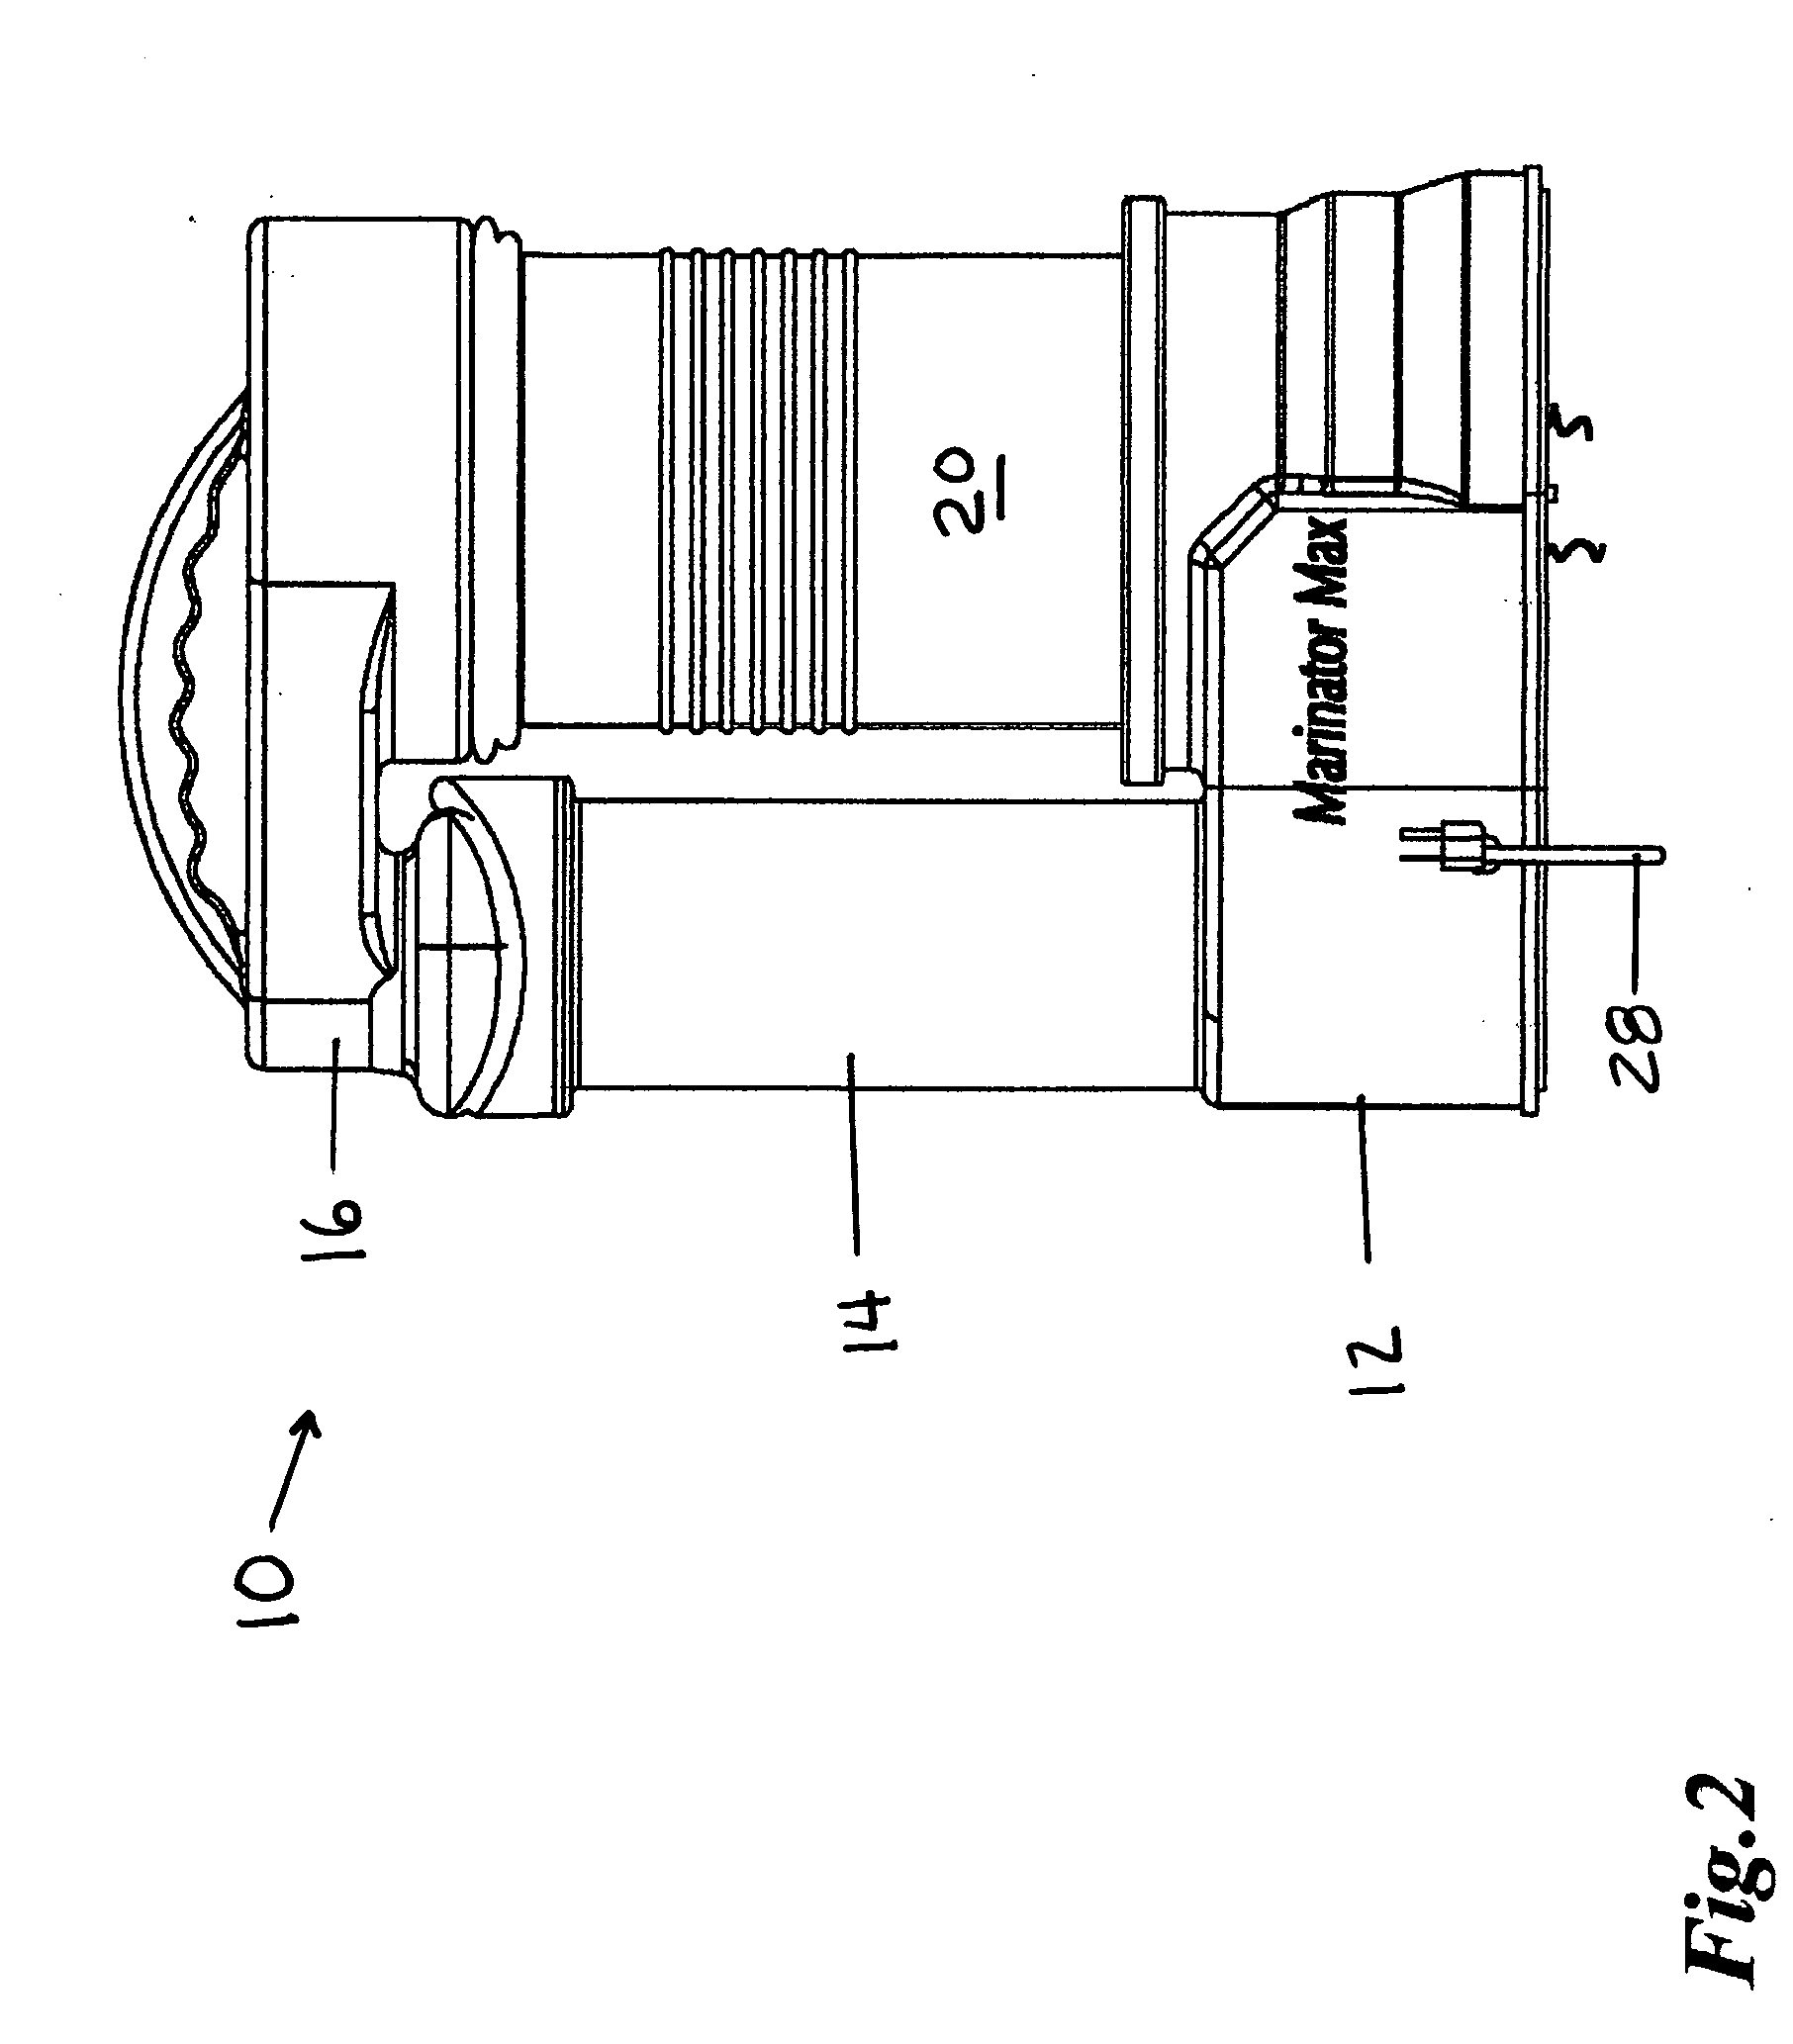 Apparatus for marinating foods